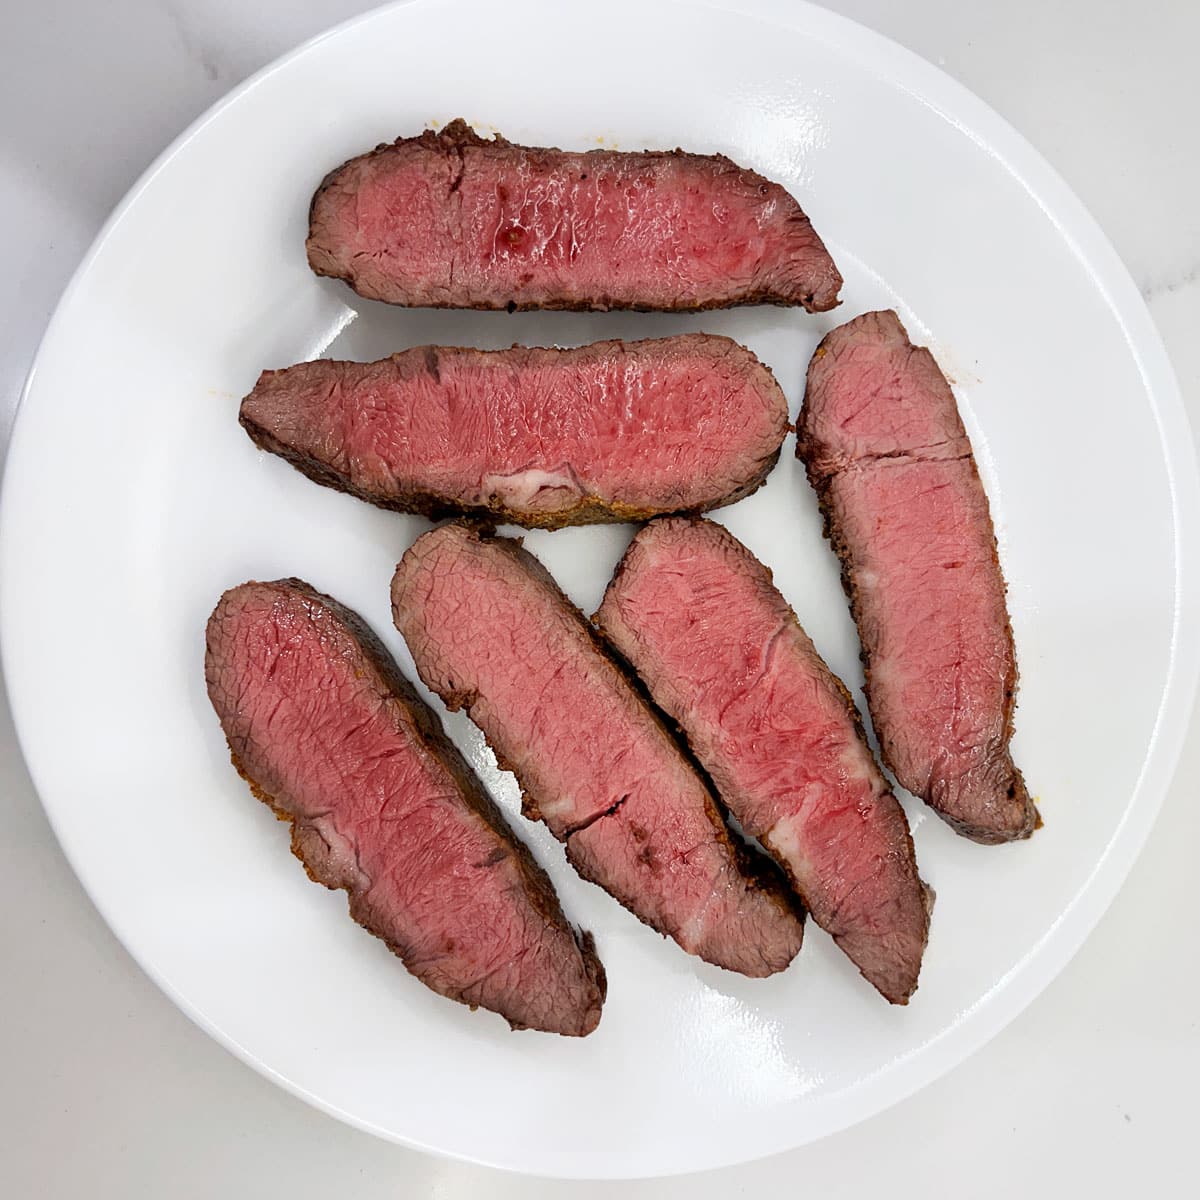 Reheated leftovers of a flat iron steak.